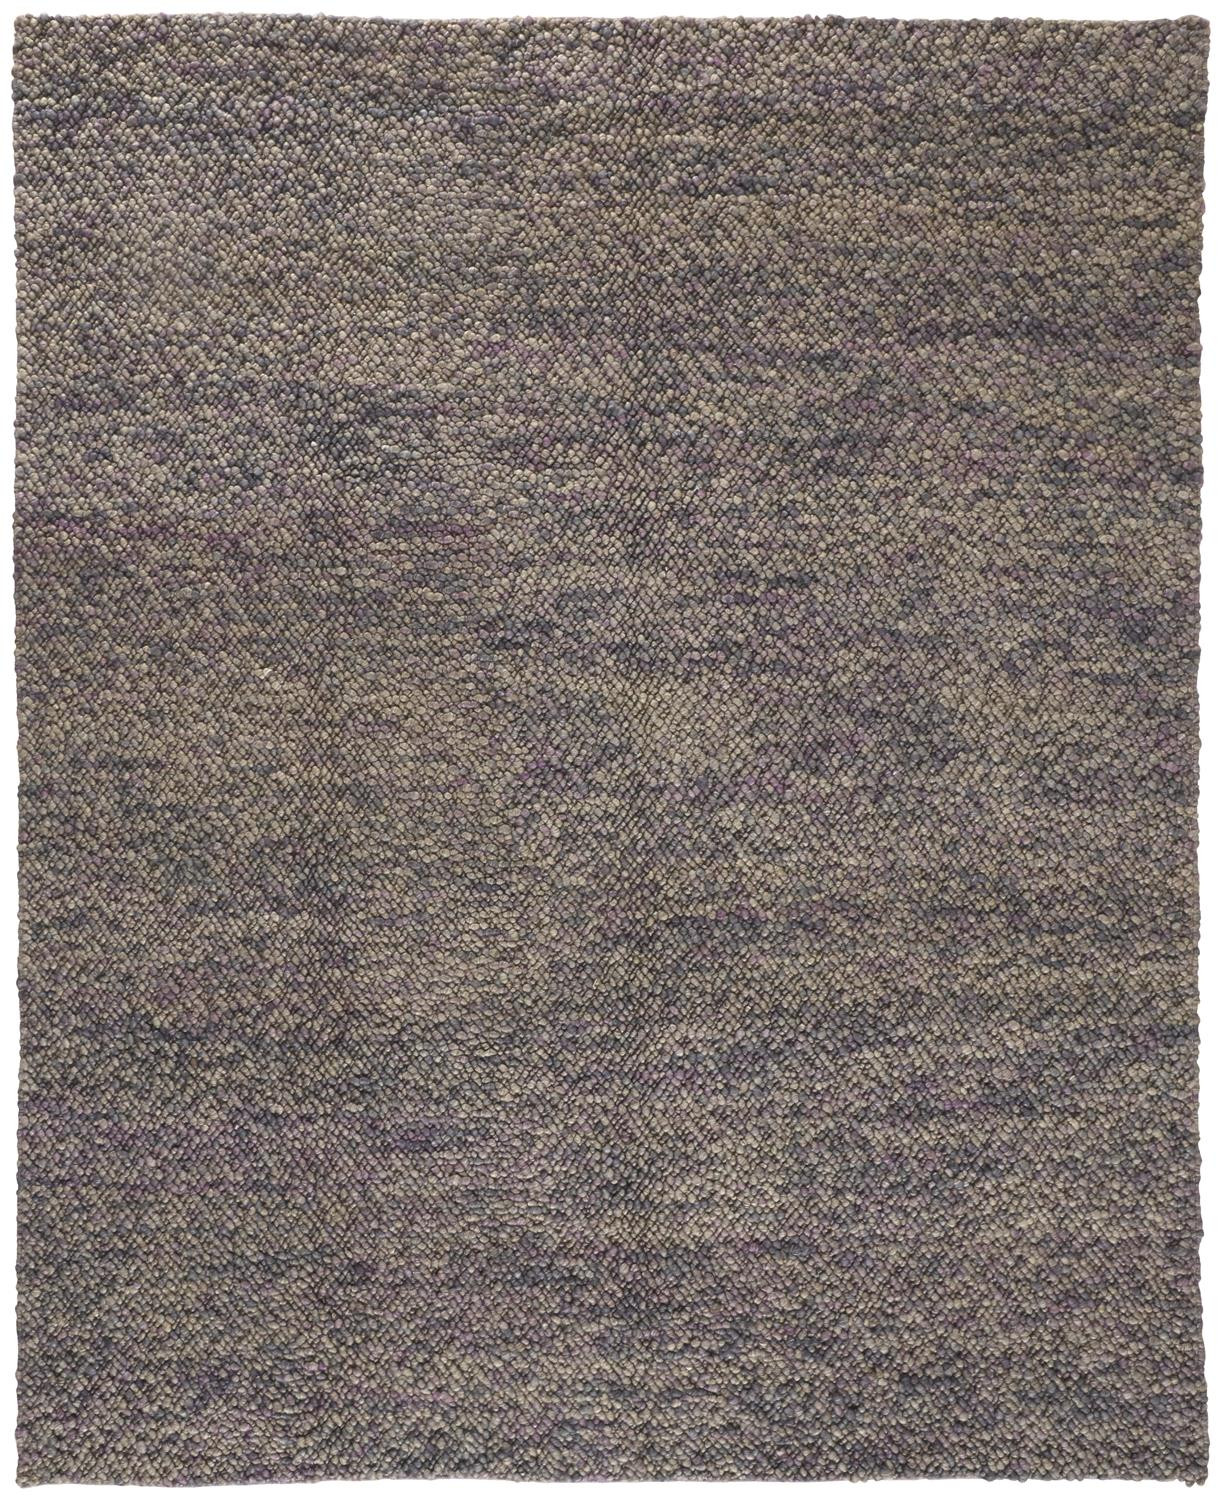 2' X 3' Purple Taupe And Gray Wool Hand Woven Distressed Stain Resistant Area Rug-515287-1